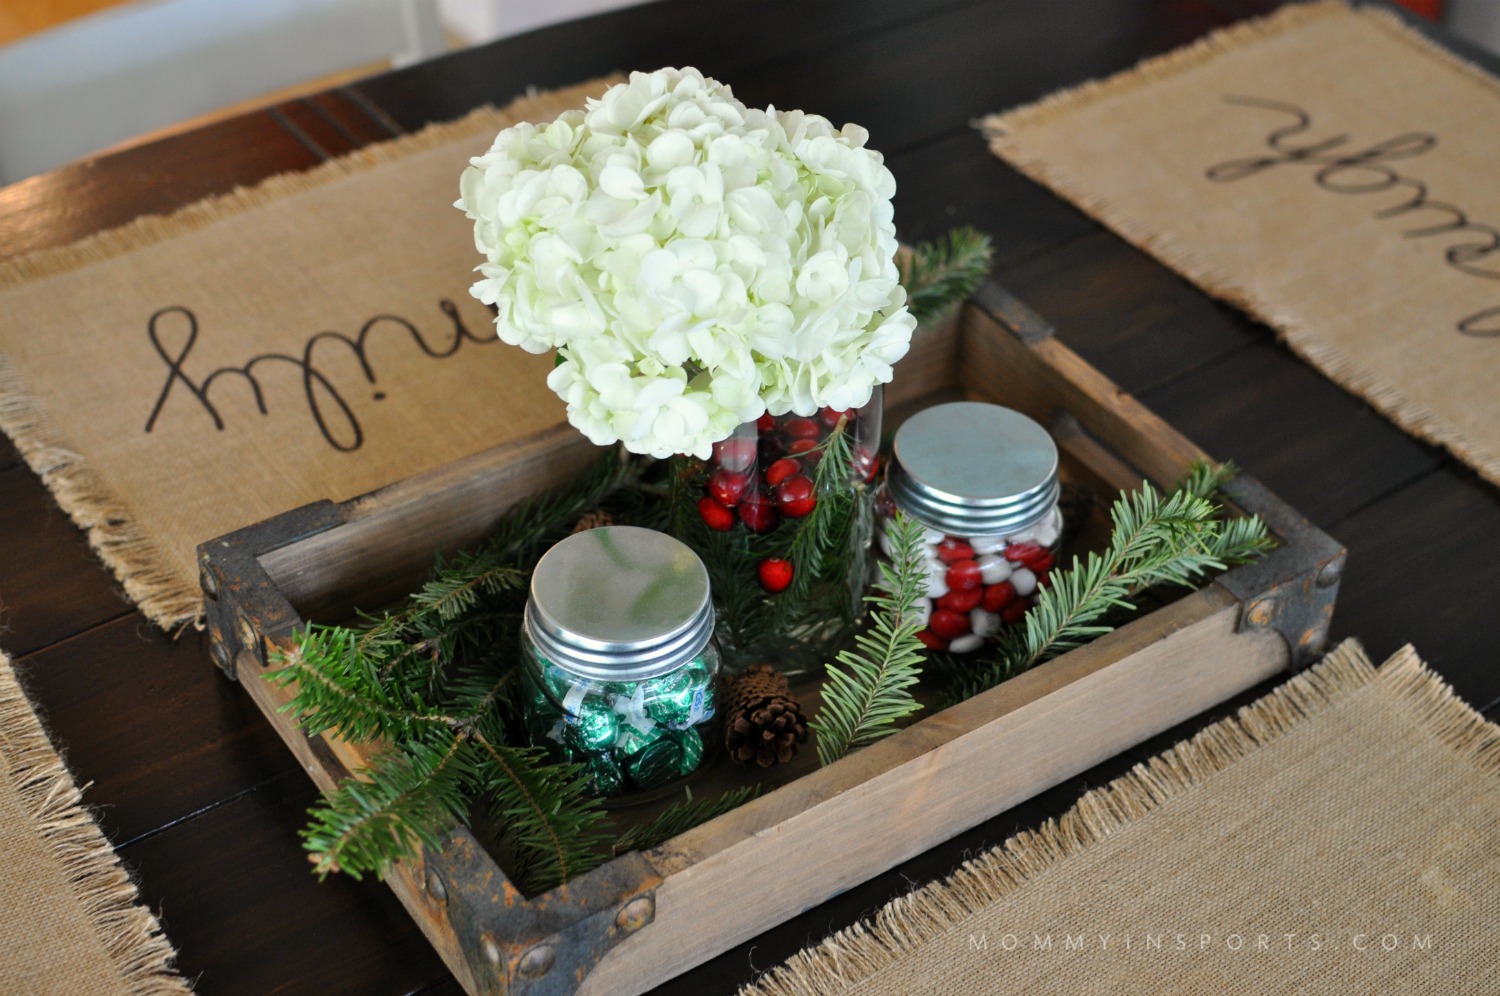 A wooden box or wine crate is perfect for an ottoman tray or centerpiece! Fill with flowers, cranberries, Christmas tree clippings and jars of candy to create a simple DIY holiday centerpiece!